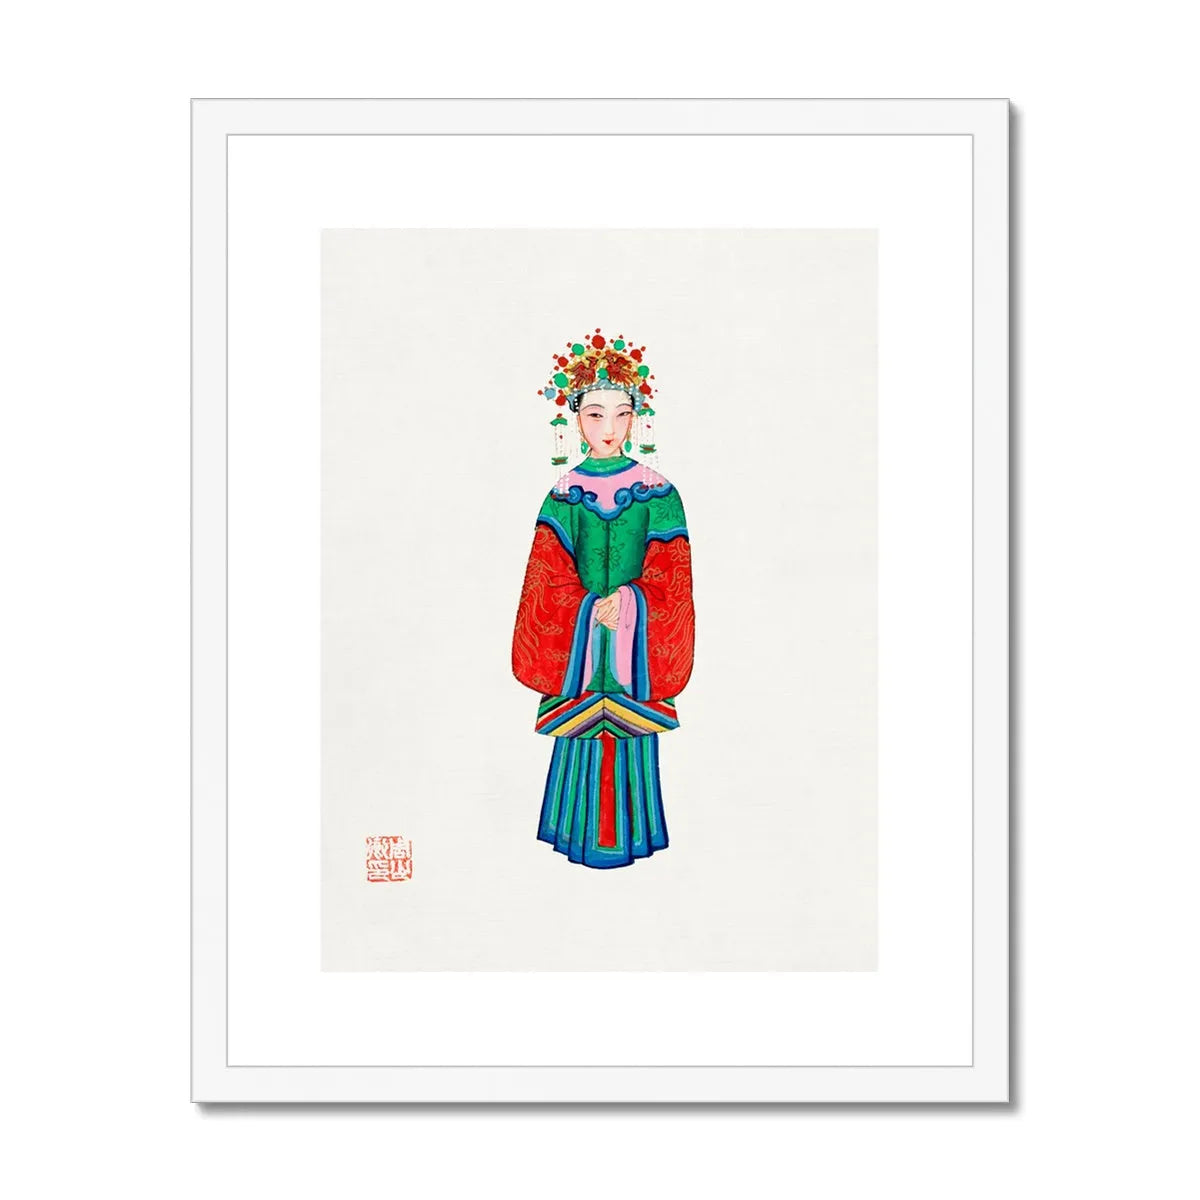 Chinese Imperial Princess Framed & Mounted Print - 16’x20’ / White Frame - Posters Prints & Visual Artwork